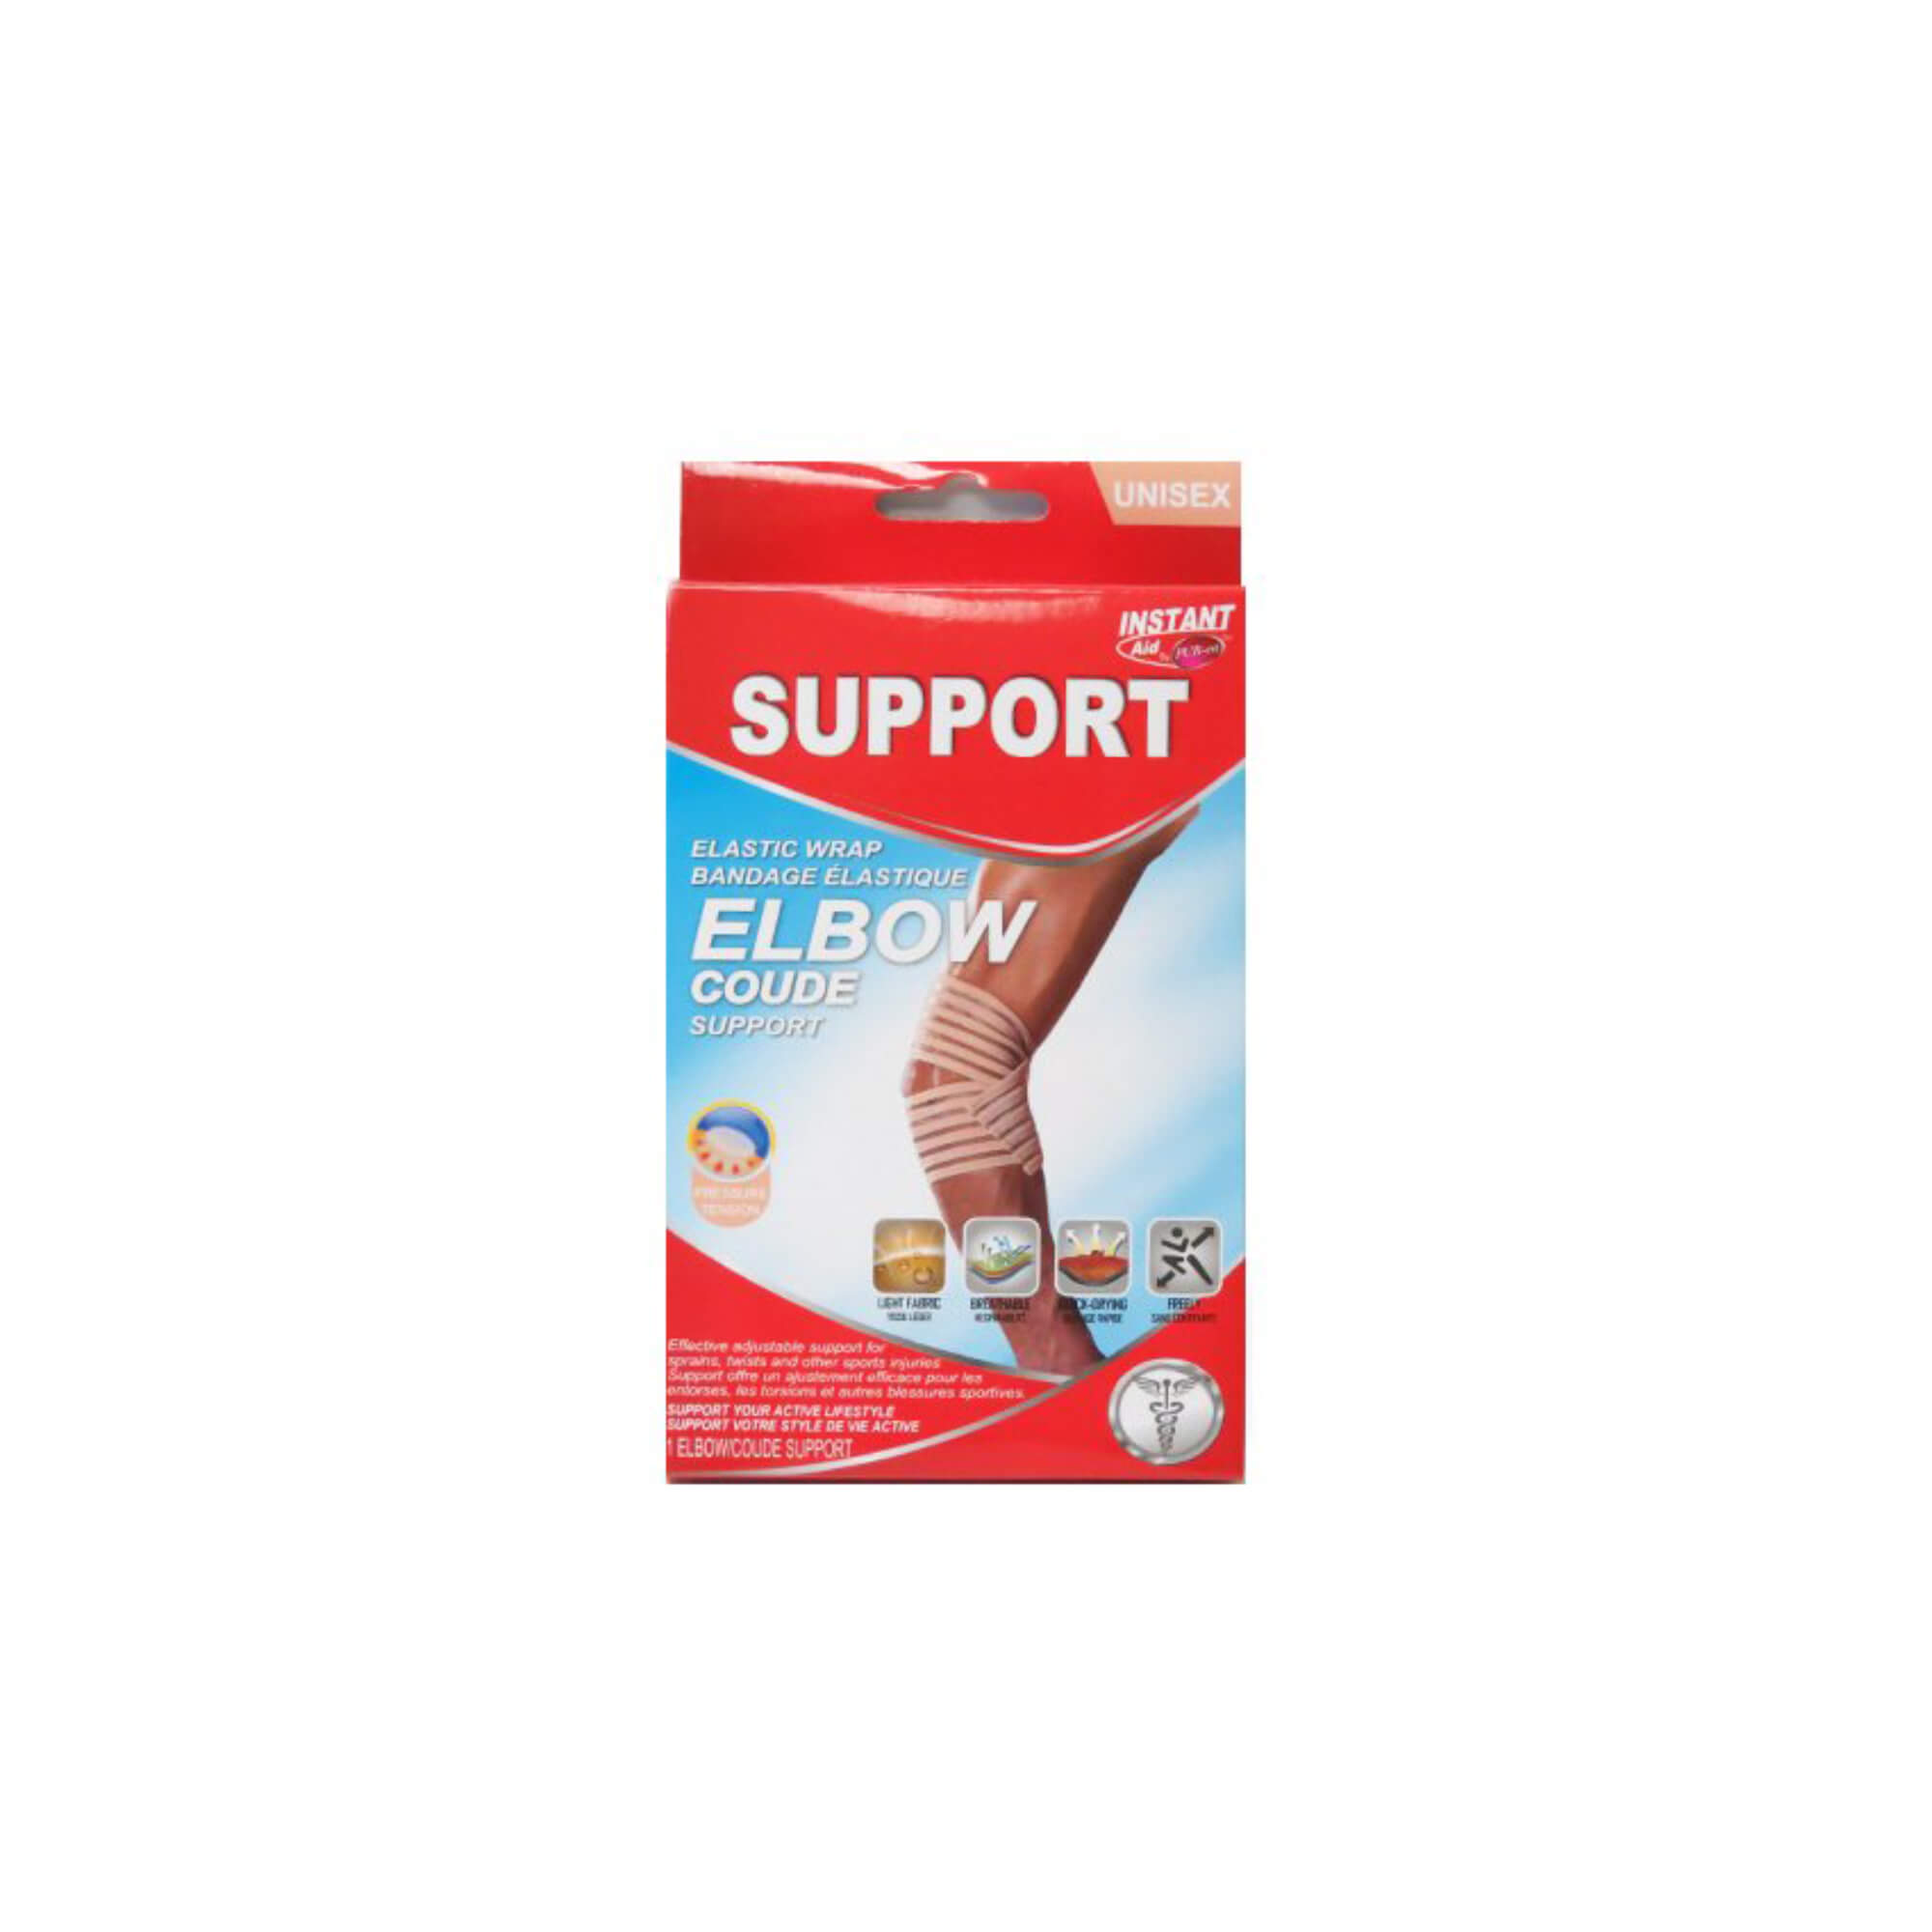 Instant Aid By Purest Elastic Wrap Elbow Support 312970